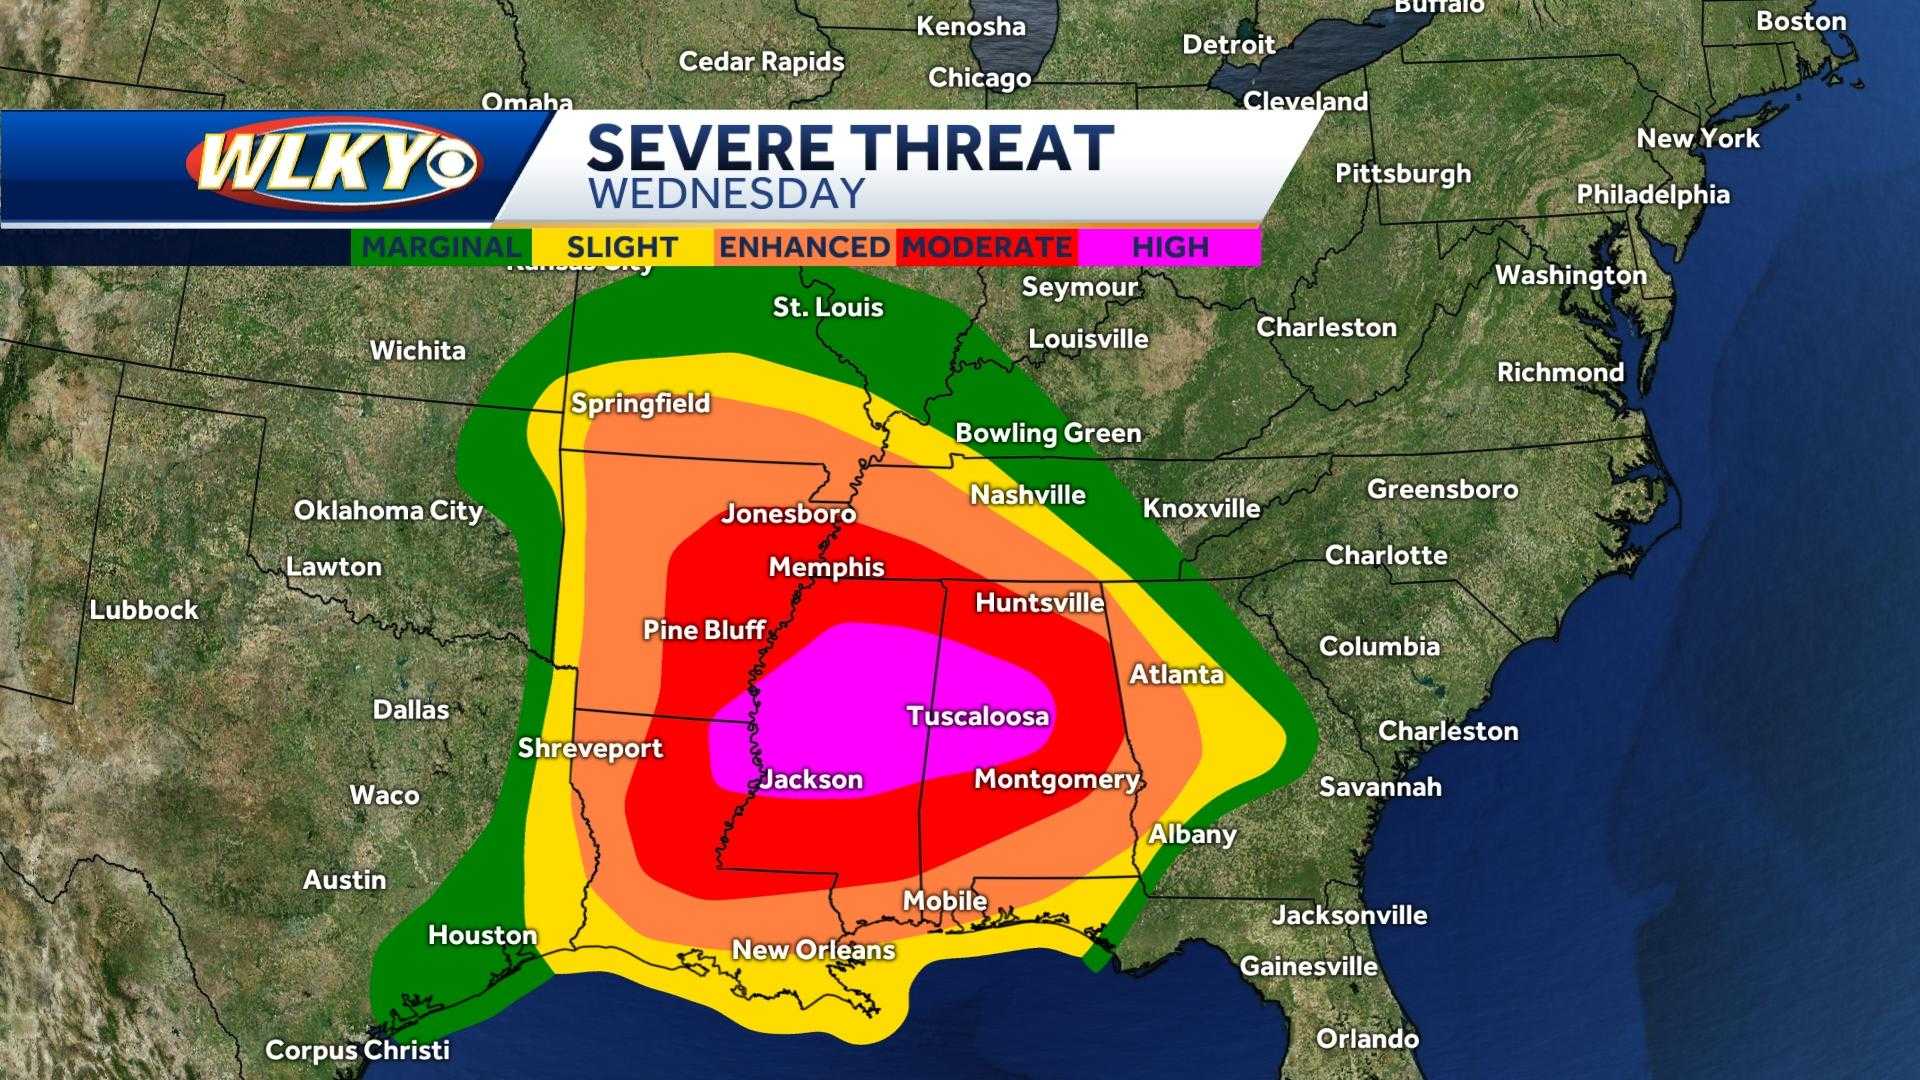 Severe weather outbreak possible to the south; Kentucky could see remnants